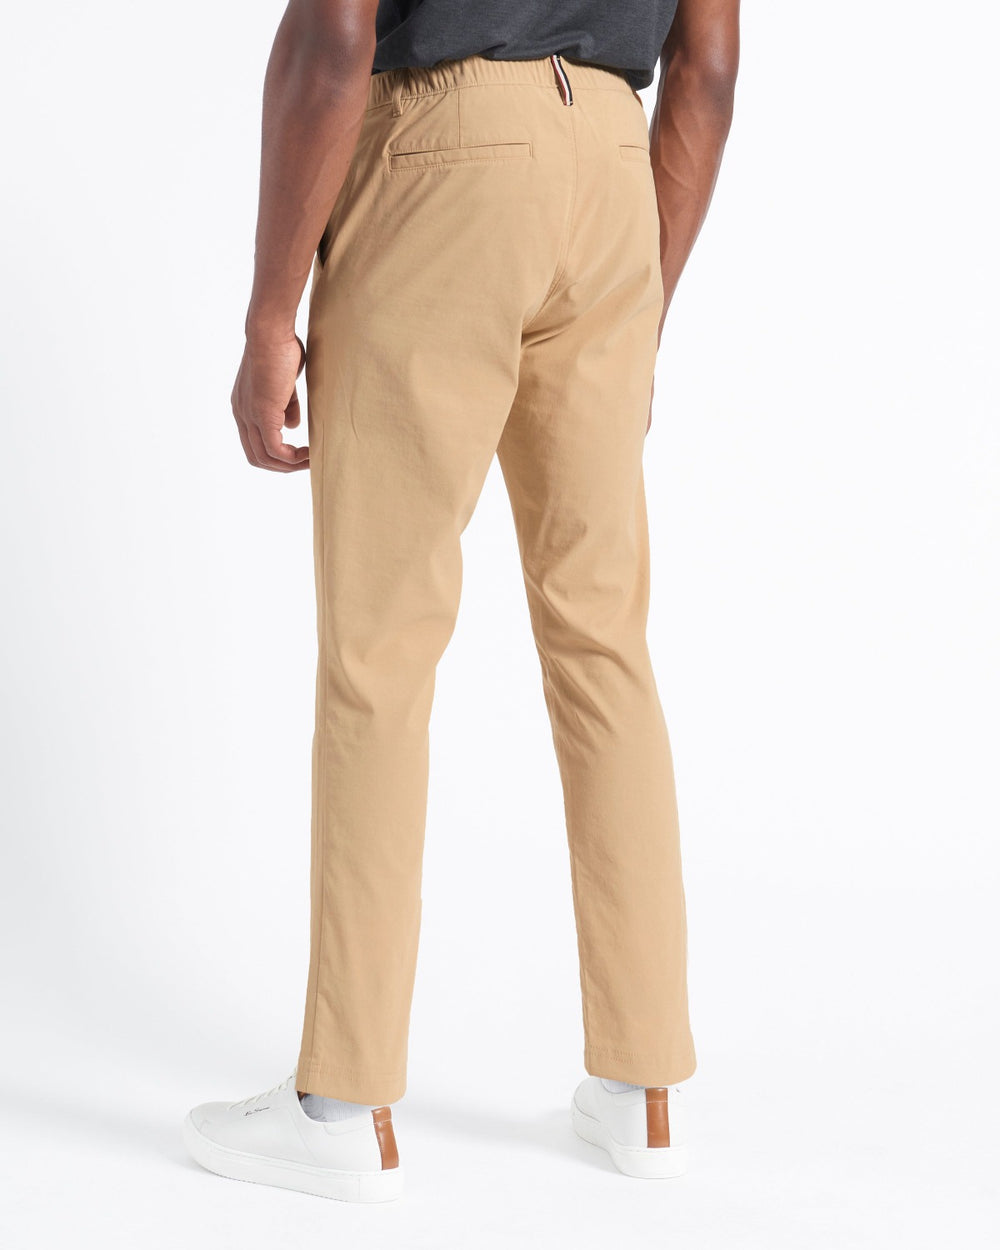 20 Best Khaki Pants for Men 2023, Tested by Style Editors